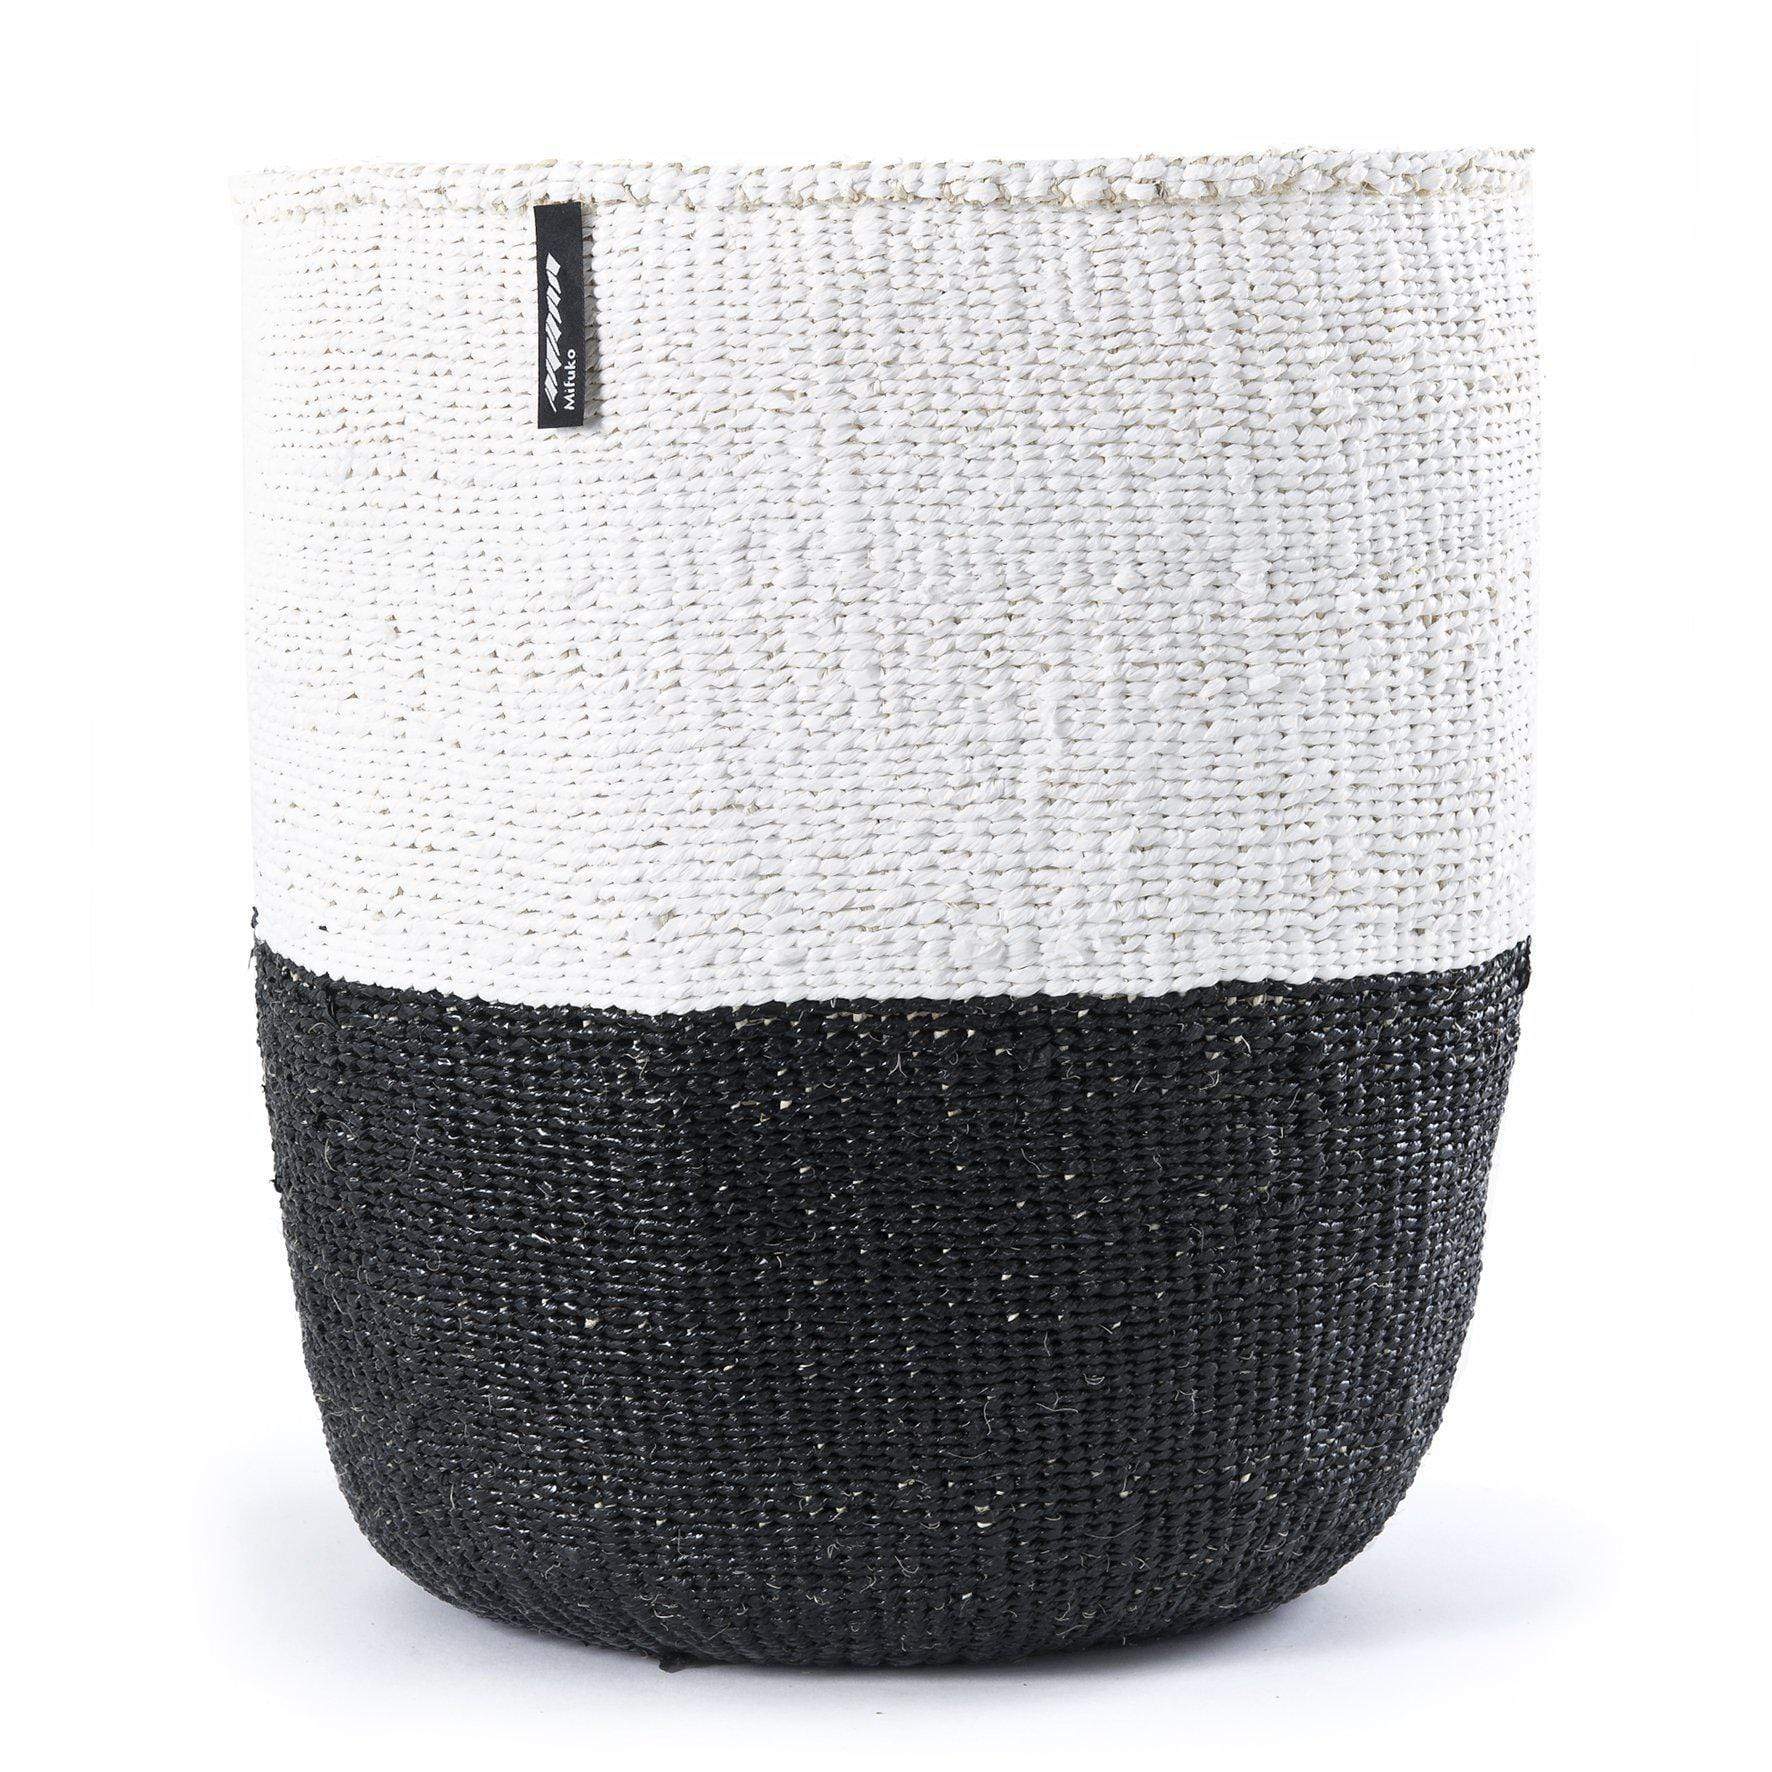 Mifuko Partly recycled plastic and sisal Medium size basket L Kiondo basket | White and black duo L